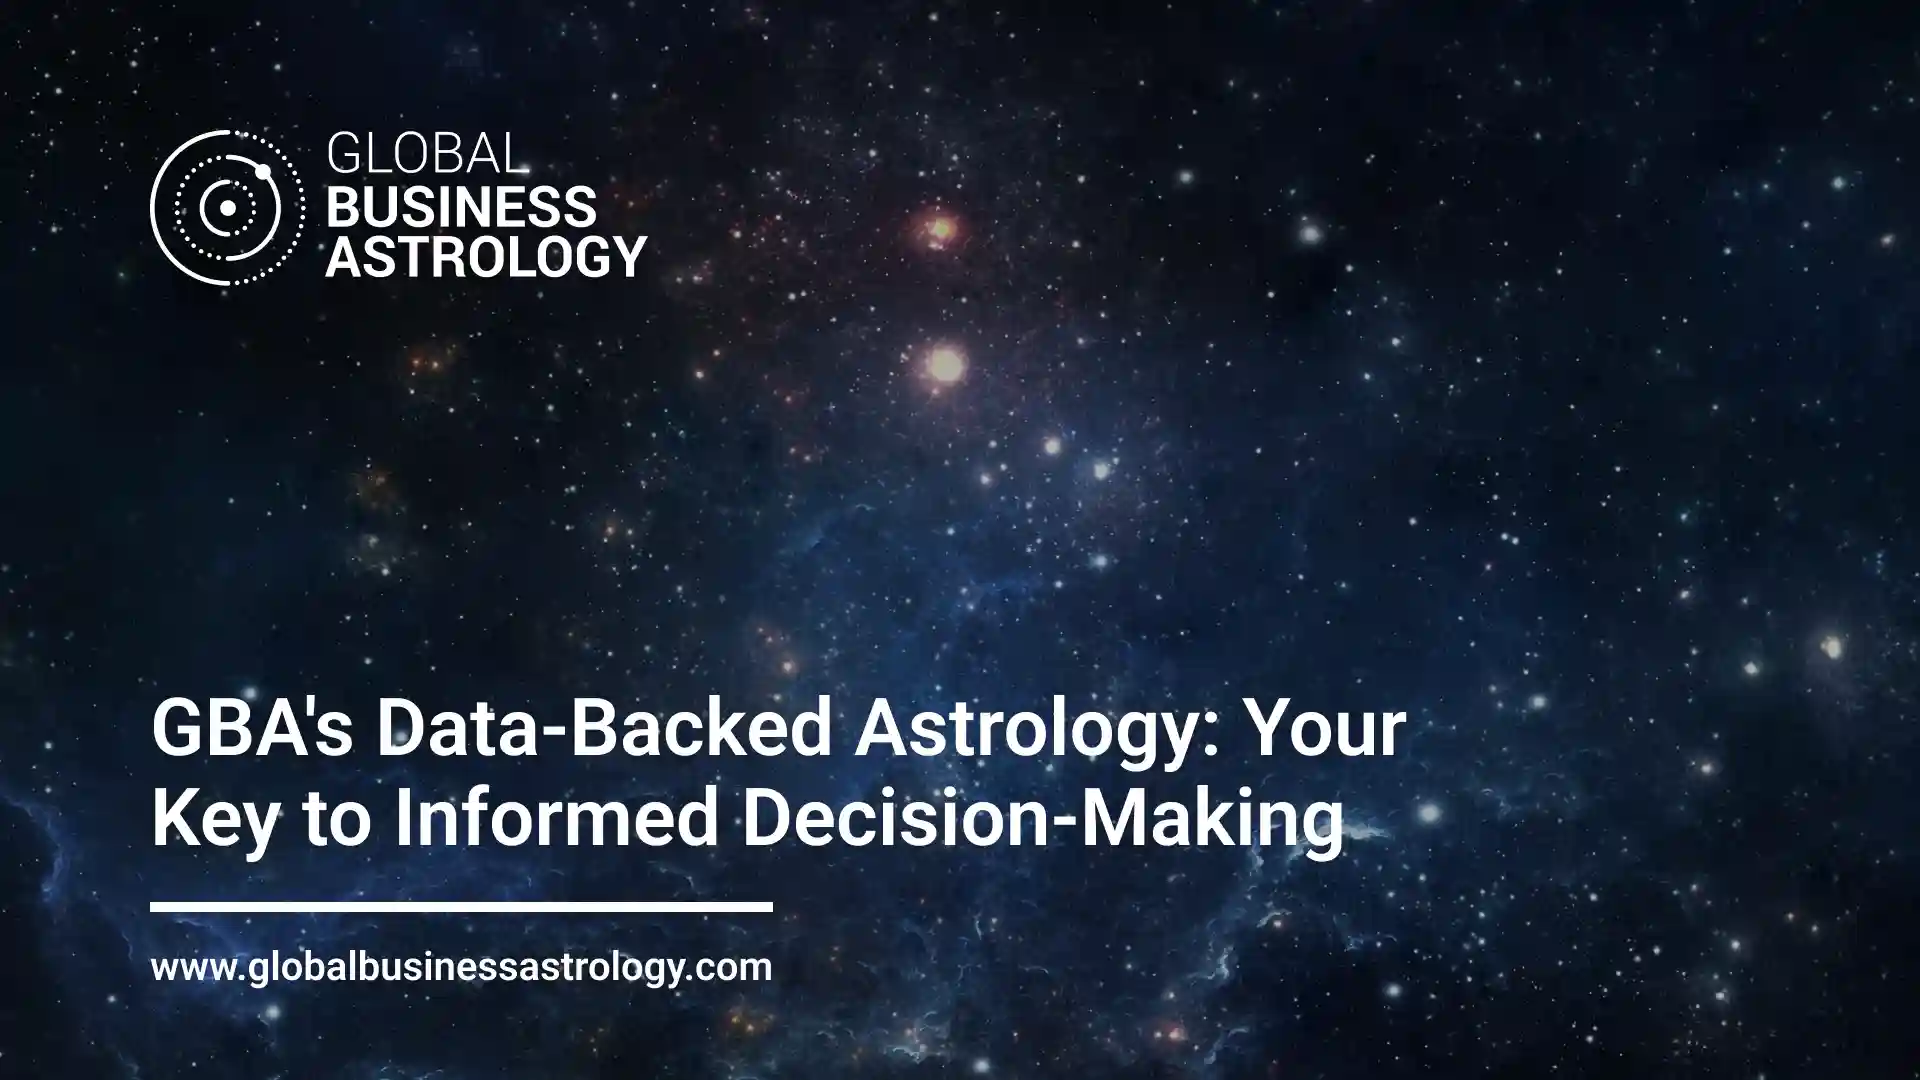 GBA's Data-Backed Astrology Your Key to Informed Decision-Making